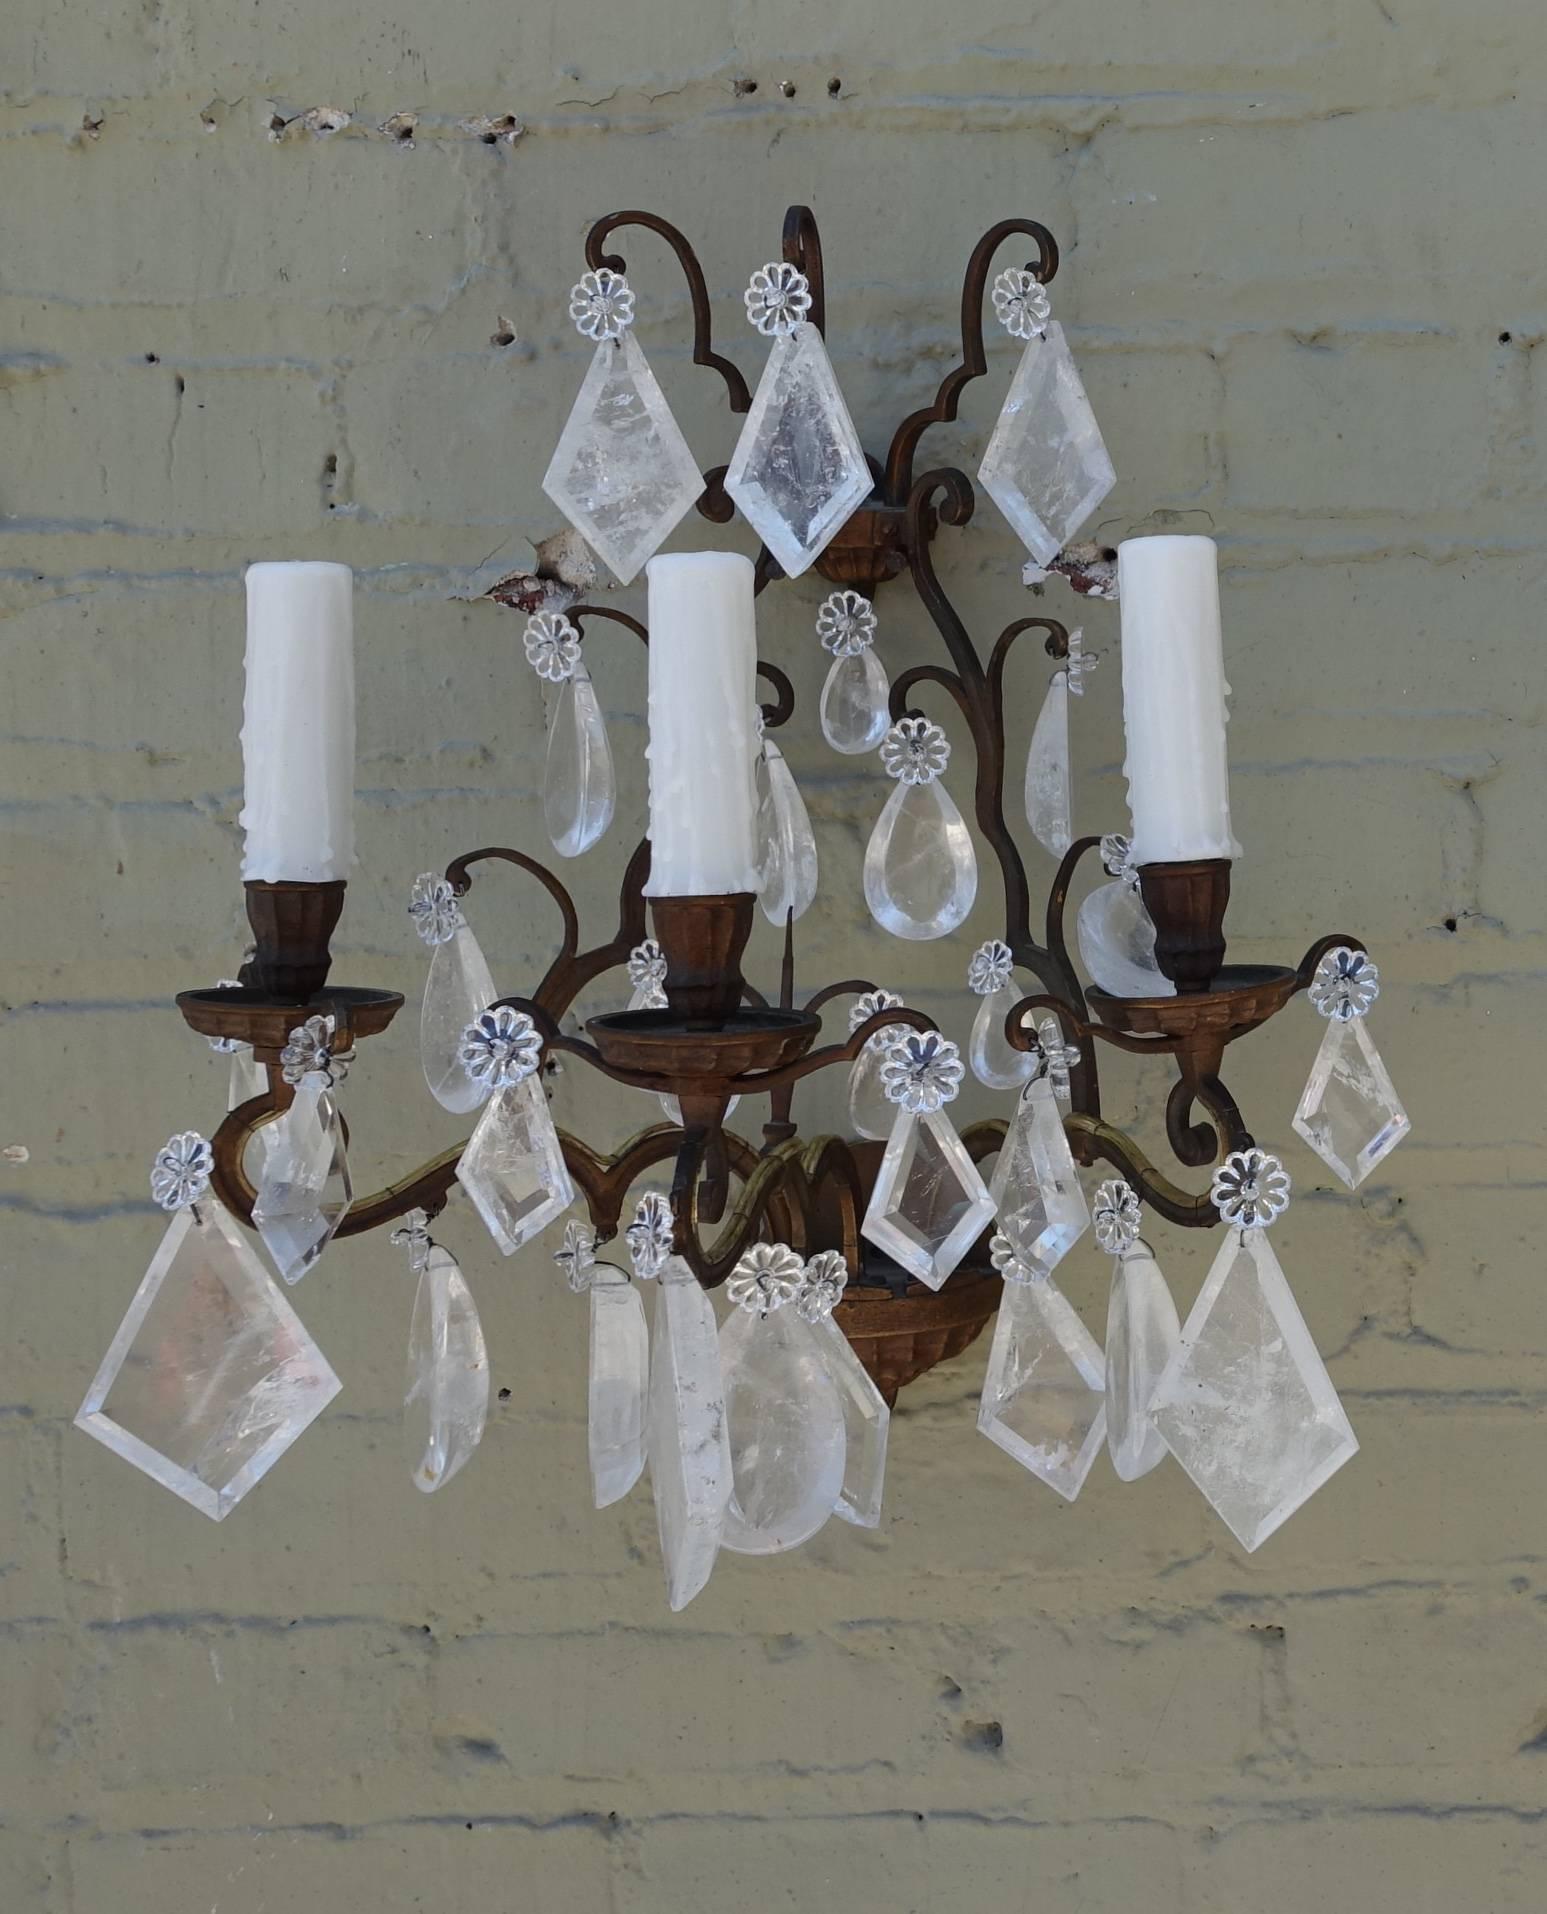 Pair of three-light bronze rock crystal sconces with drip wax candle covers. The sconces are adorned with a combination of kite shaped rock crystals and almond shaped rock crystals. The pair of sconces has been newly rewired with white drip wax